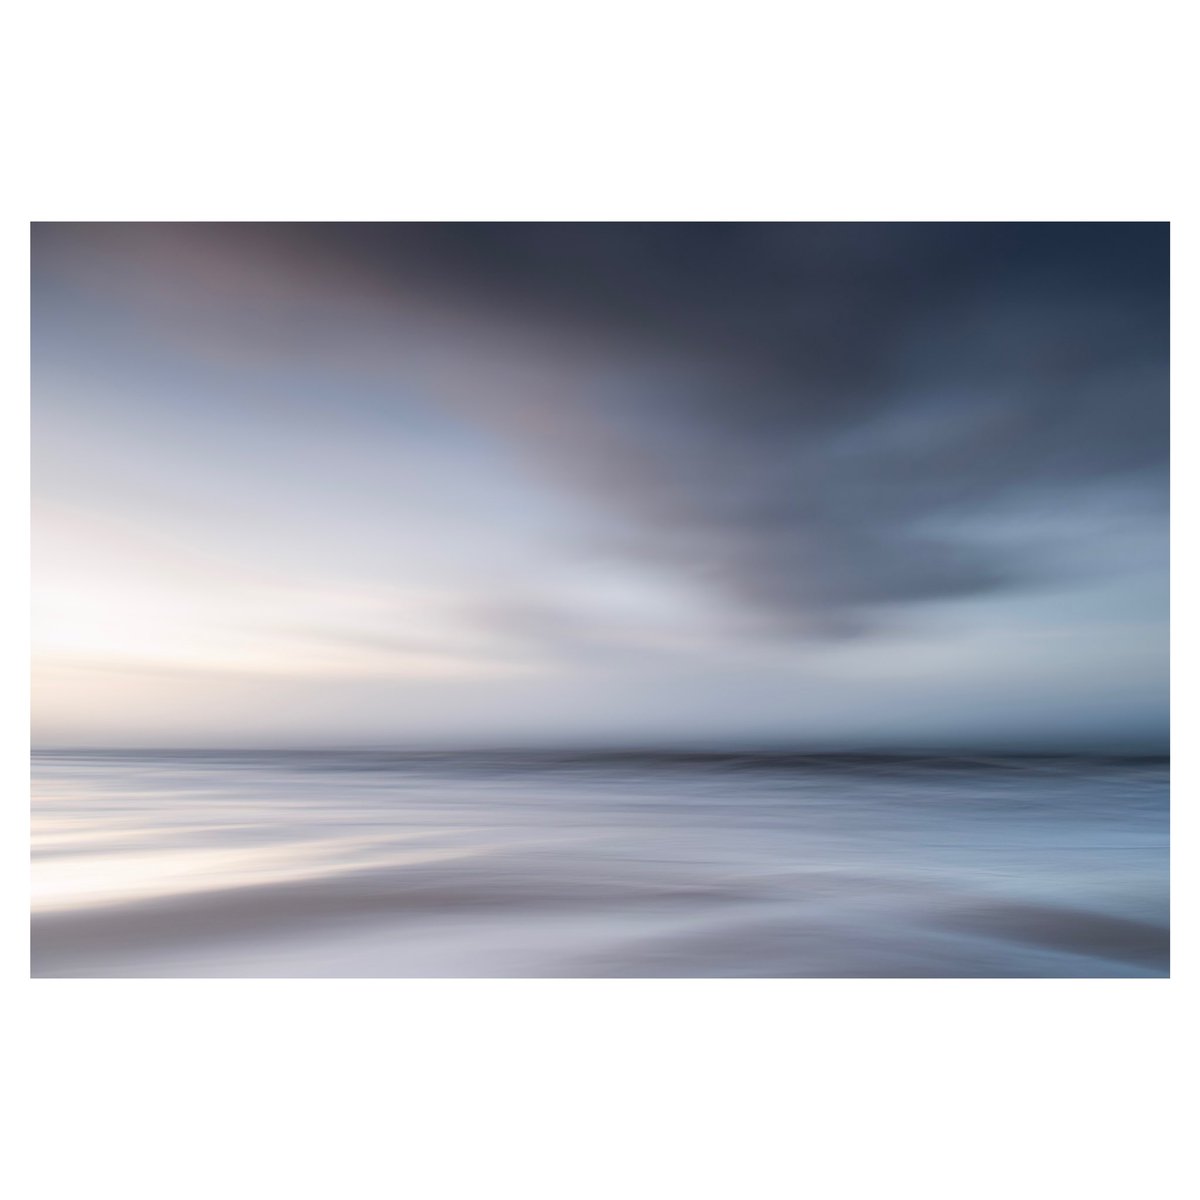 The last of the #light on the #shortestday captured using #icm in #Scotland 

Hope everyone has had a good #Christmas and enjoyed some #downtime